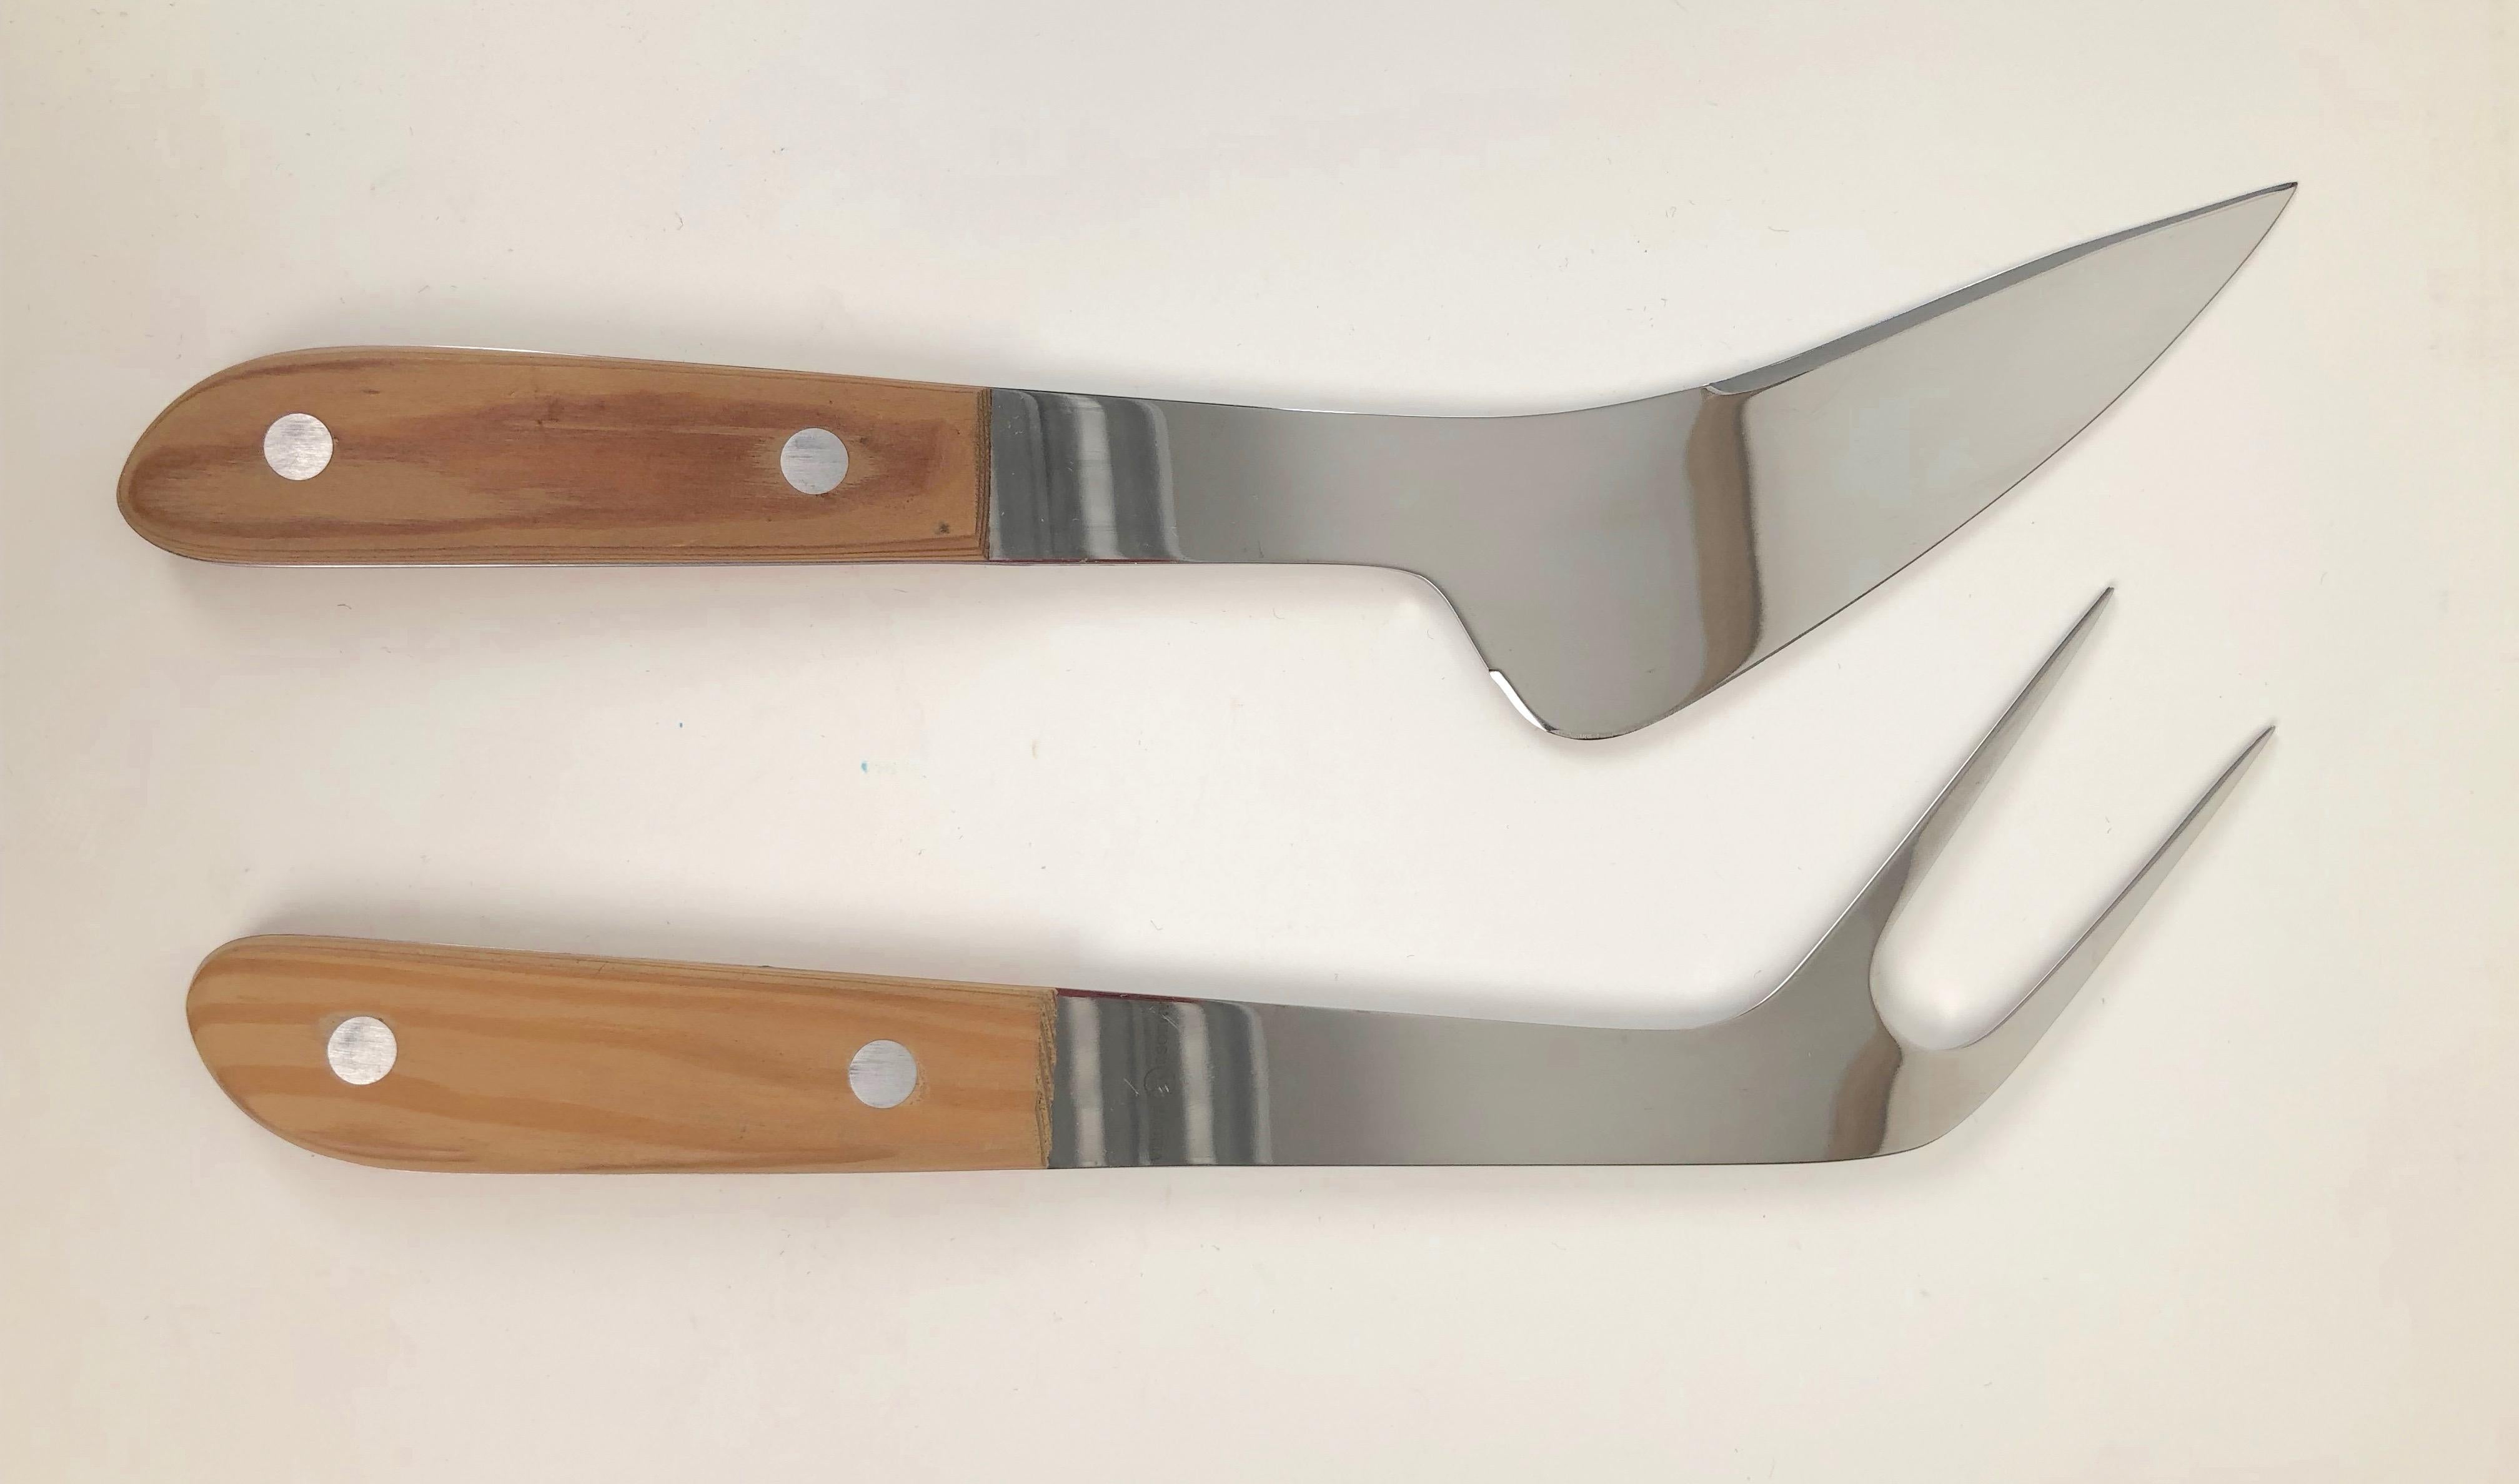 An unusual Austrian carving knife and fork, produced by Emboss Austria.
Composed of stainless steel with wooden handles. Barley used, in very fine condition.